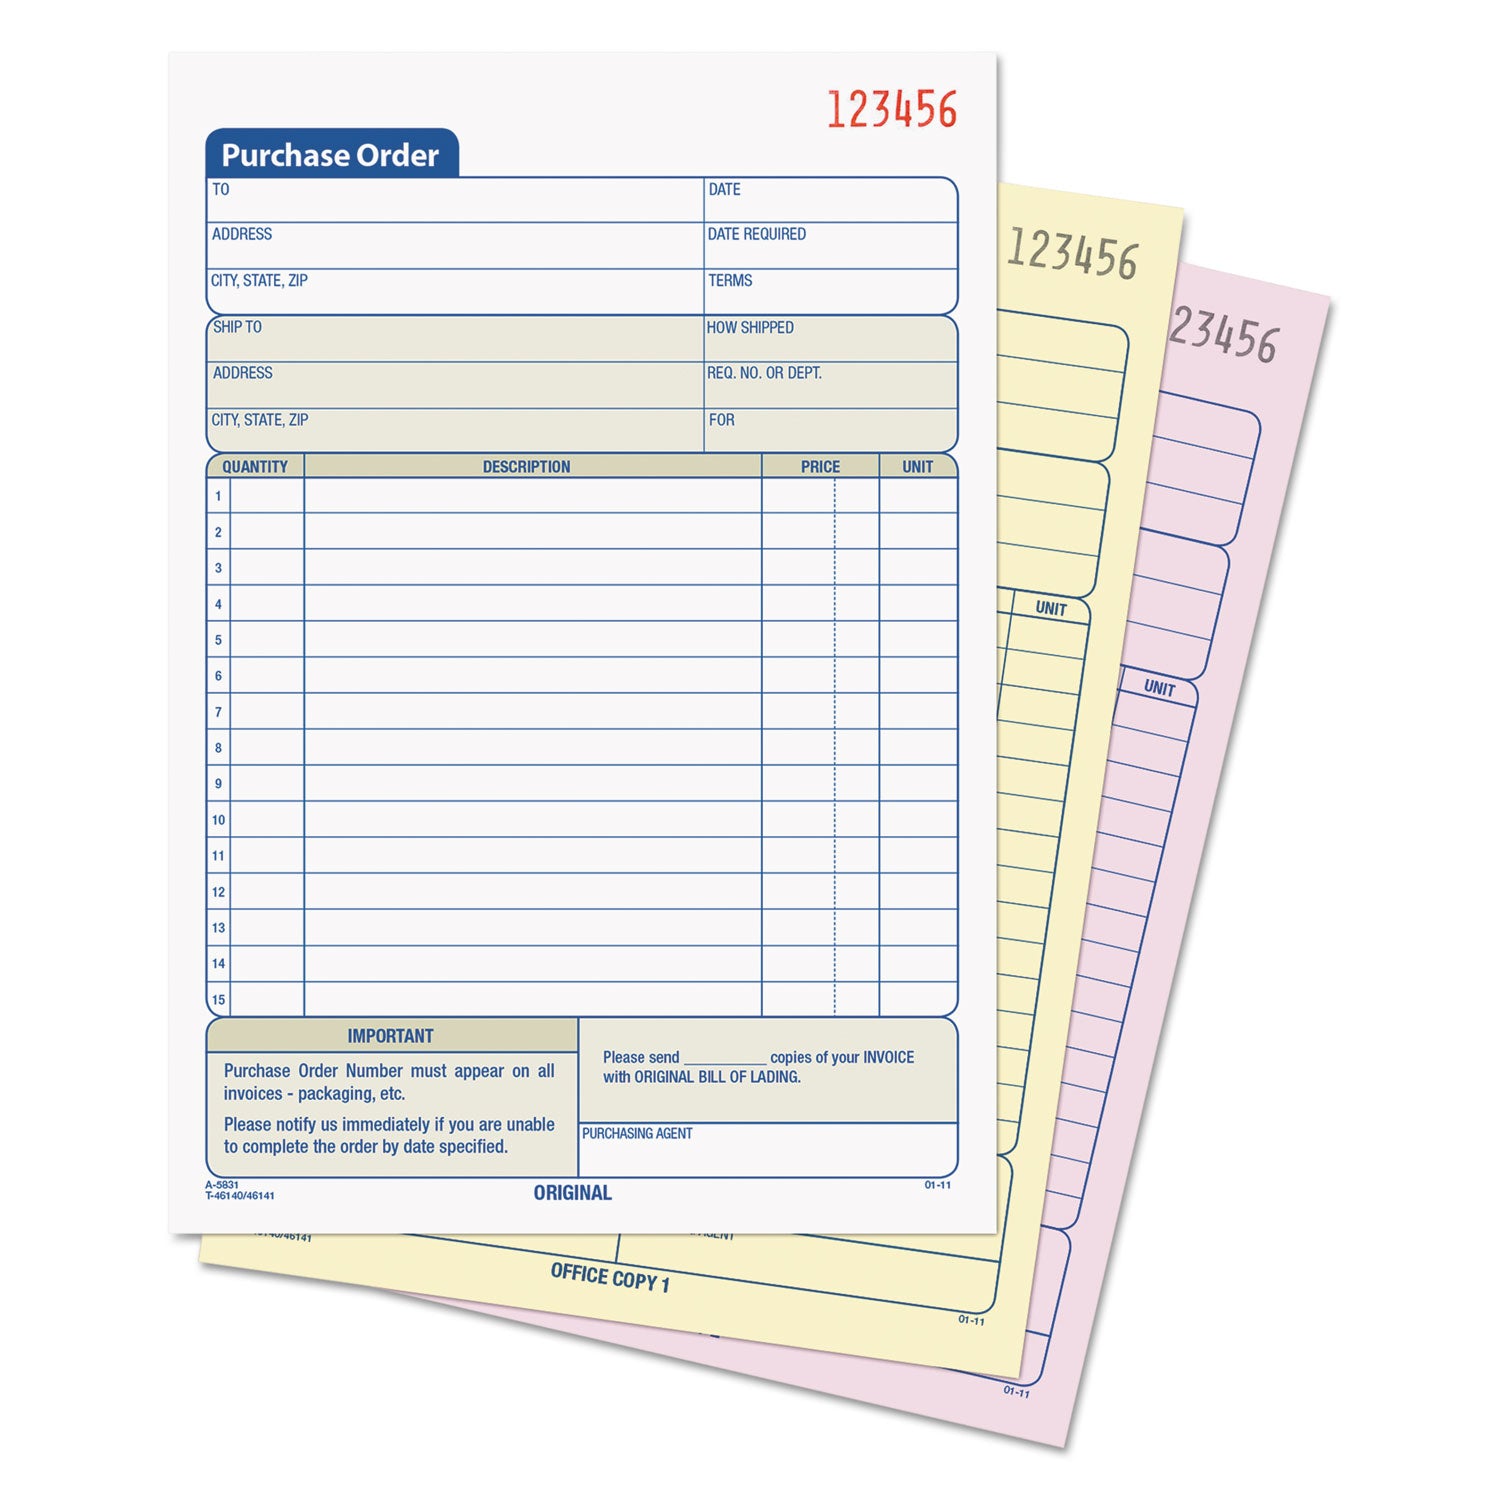 Purchase Order Book, 15 Lines, Three-Part Carbonless, 5.56 x 8.44, 50 Forms Total - 